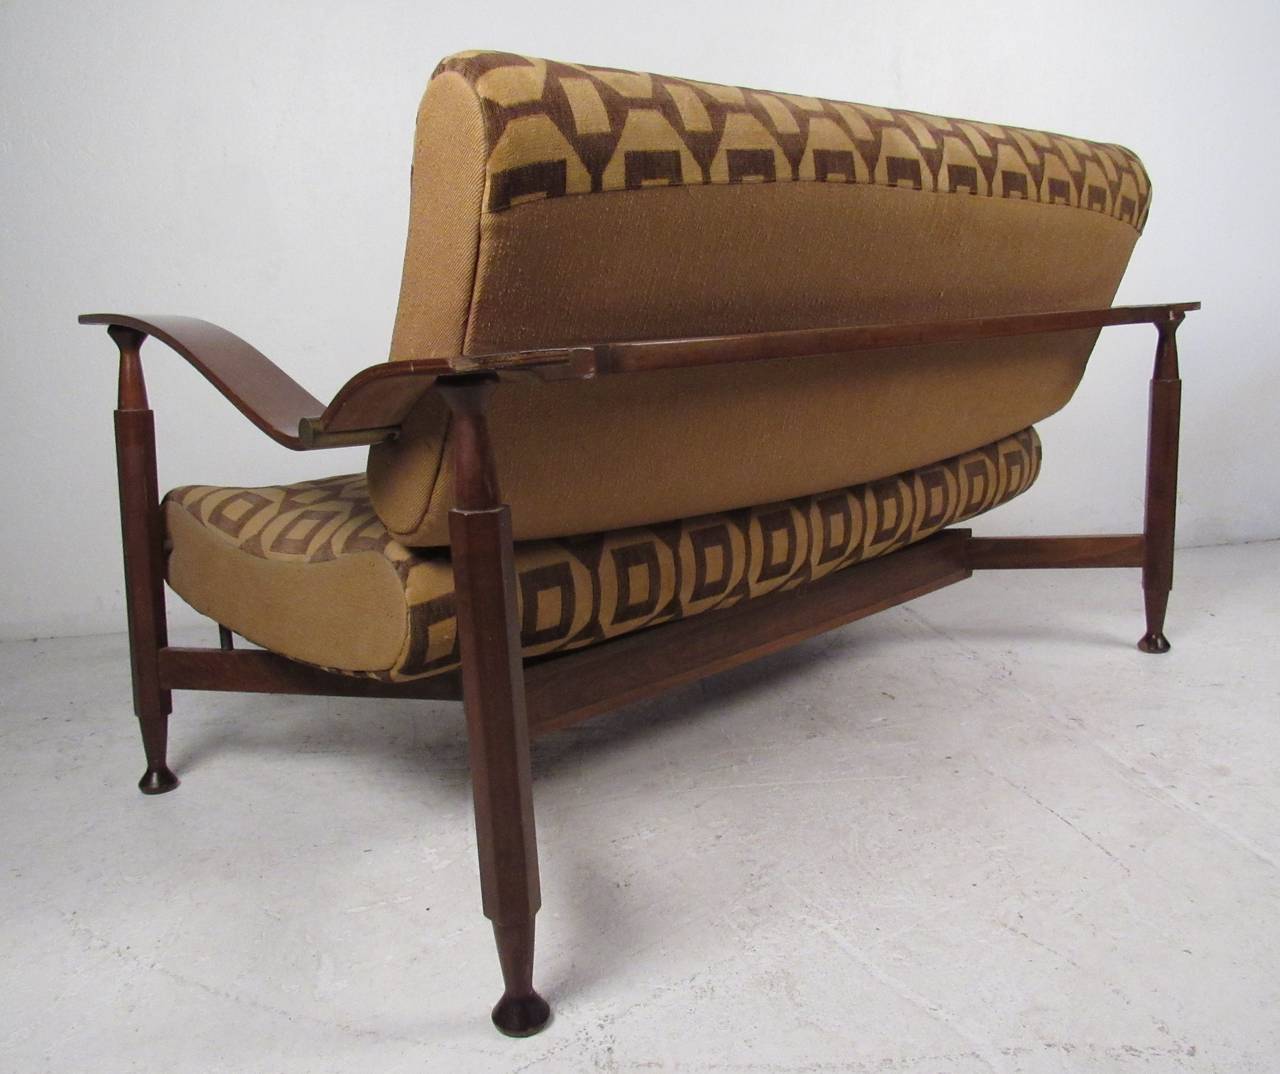 Dramatic two-seat sofa settee with swooping arms and floating seat cushion. Please confirm item location (NY or NJ) with dealer.